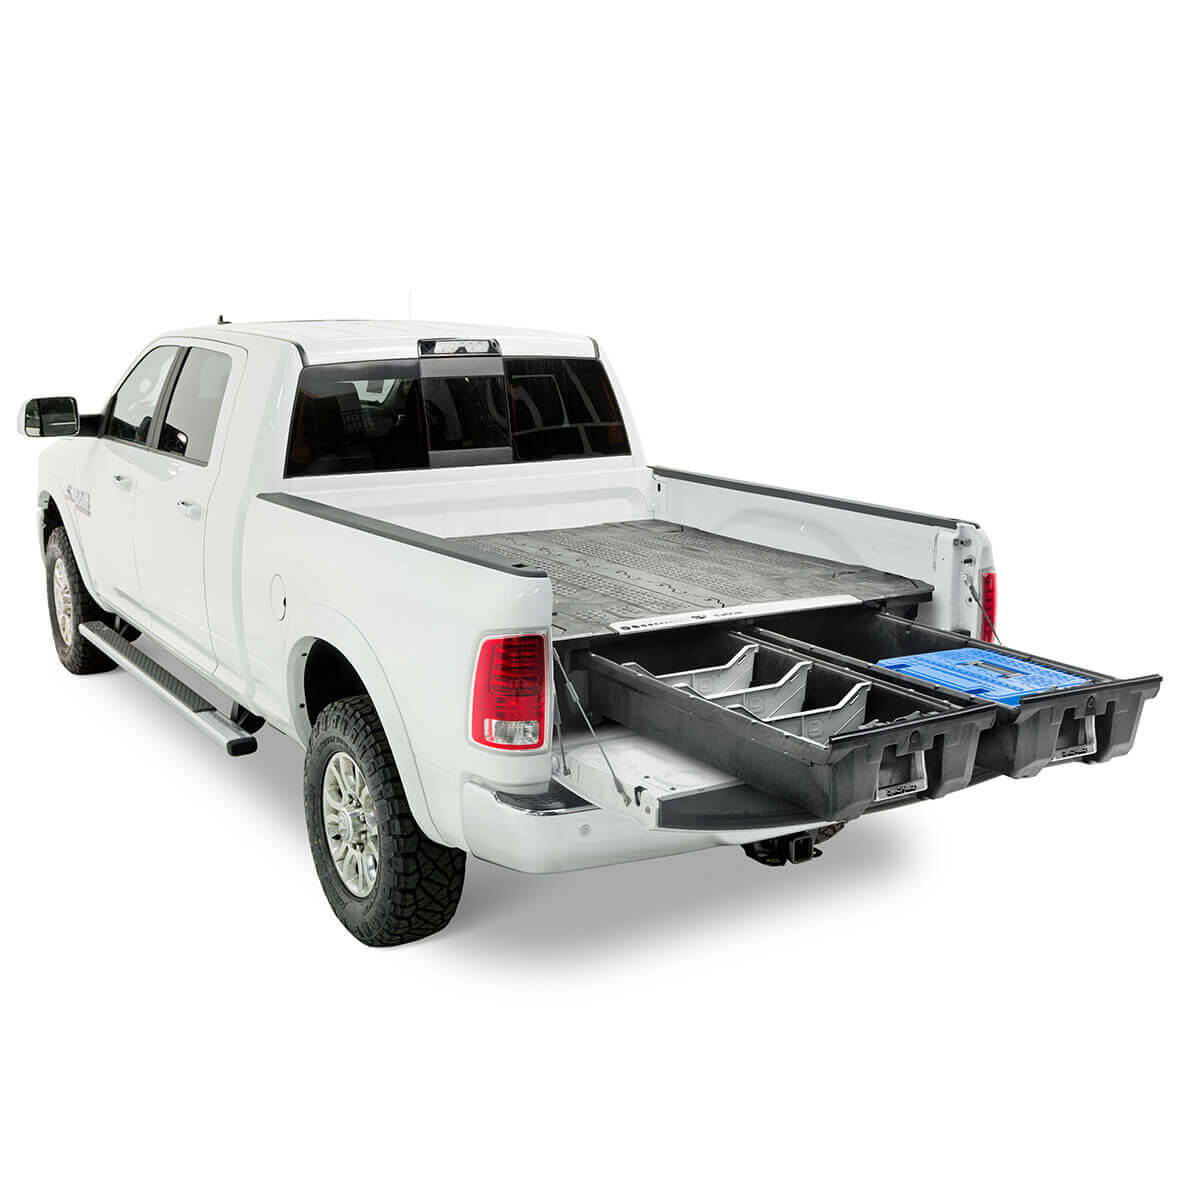 Decked 5 ft. 7 in. Bed Length Pick Up Storage System for RAM 1500 (2019) - New body style